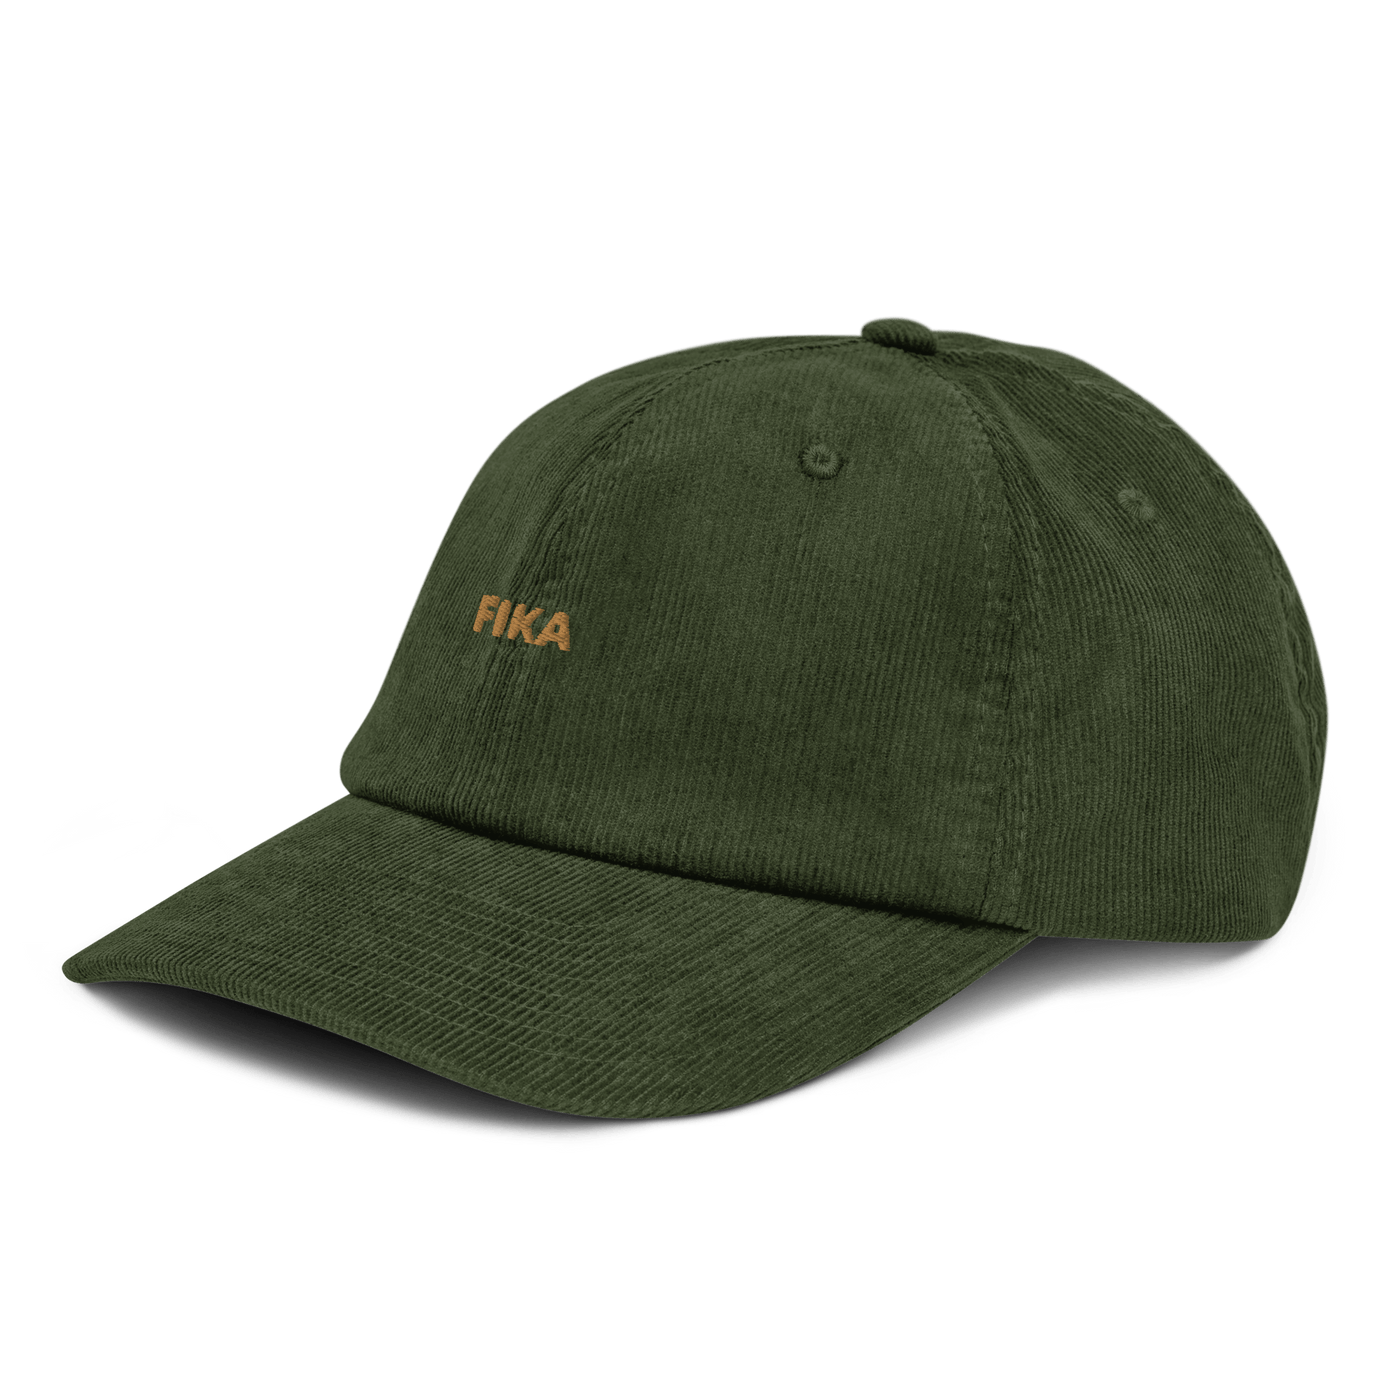 FIKA Corduroy hat - Dark Olive - - Just Another Cap Store